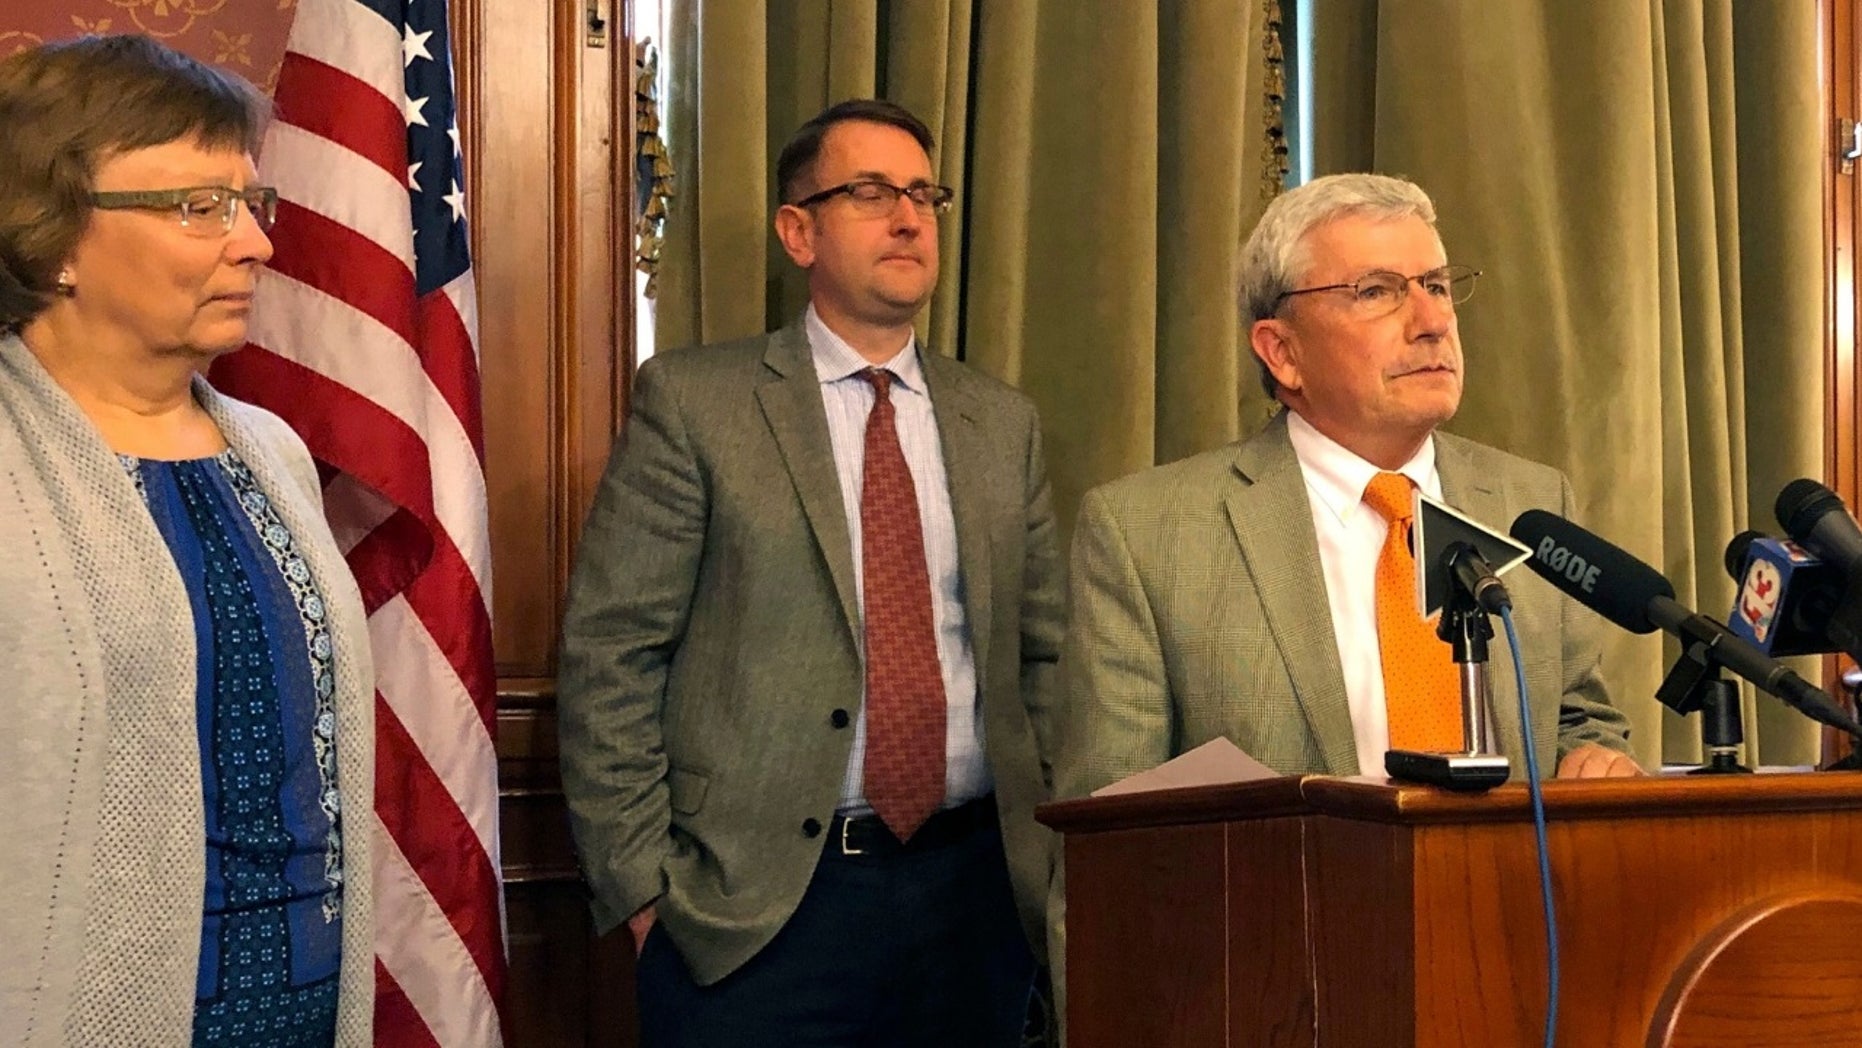 Andy McKean, right, the oldest Republican in the Iowa legislature announced Tuesday that he would become a Democrat, saying he did not want to stay in a party led by President Trump.